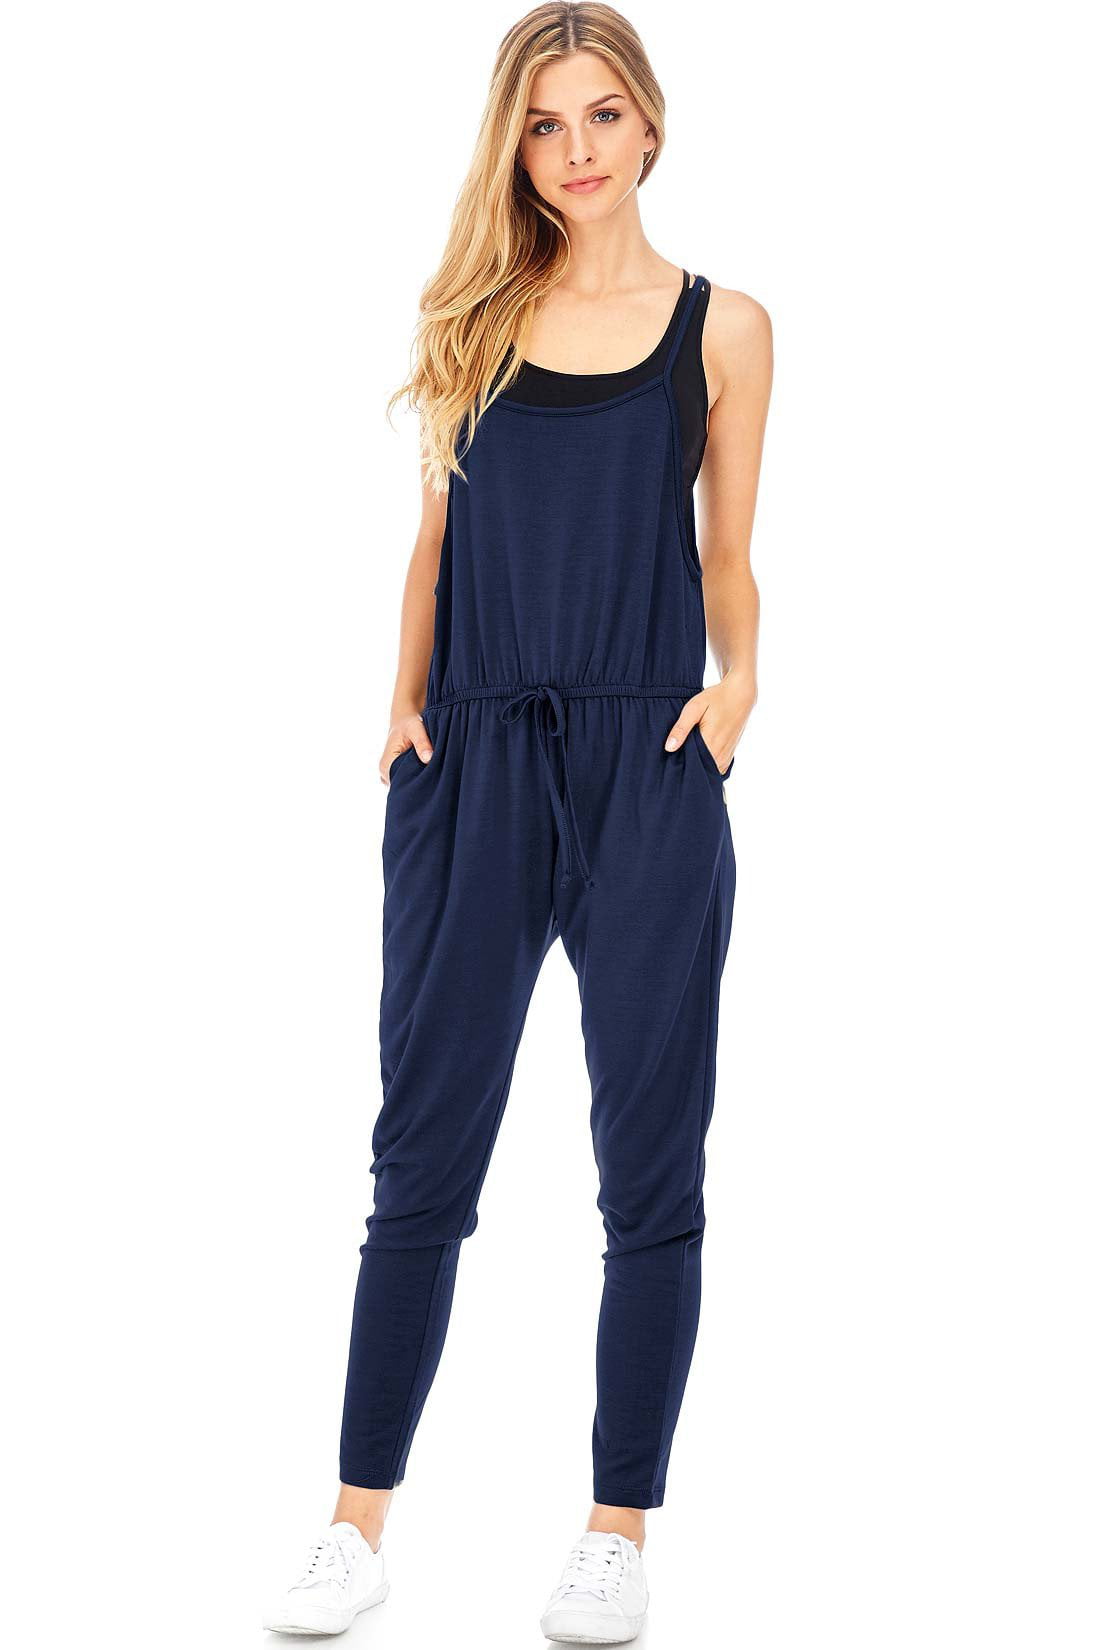 Ambiance Apparel Women's Juniors Terry Cloth Jumpsuit (L, Navy ...